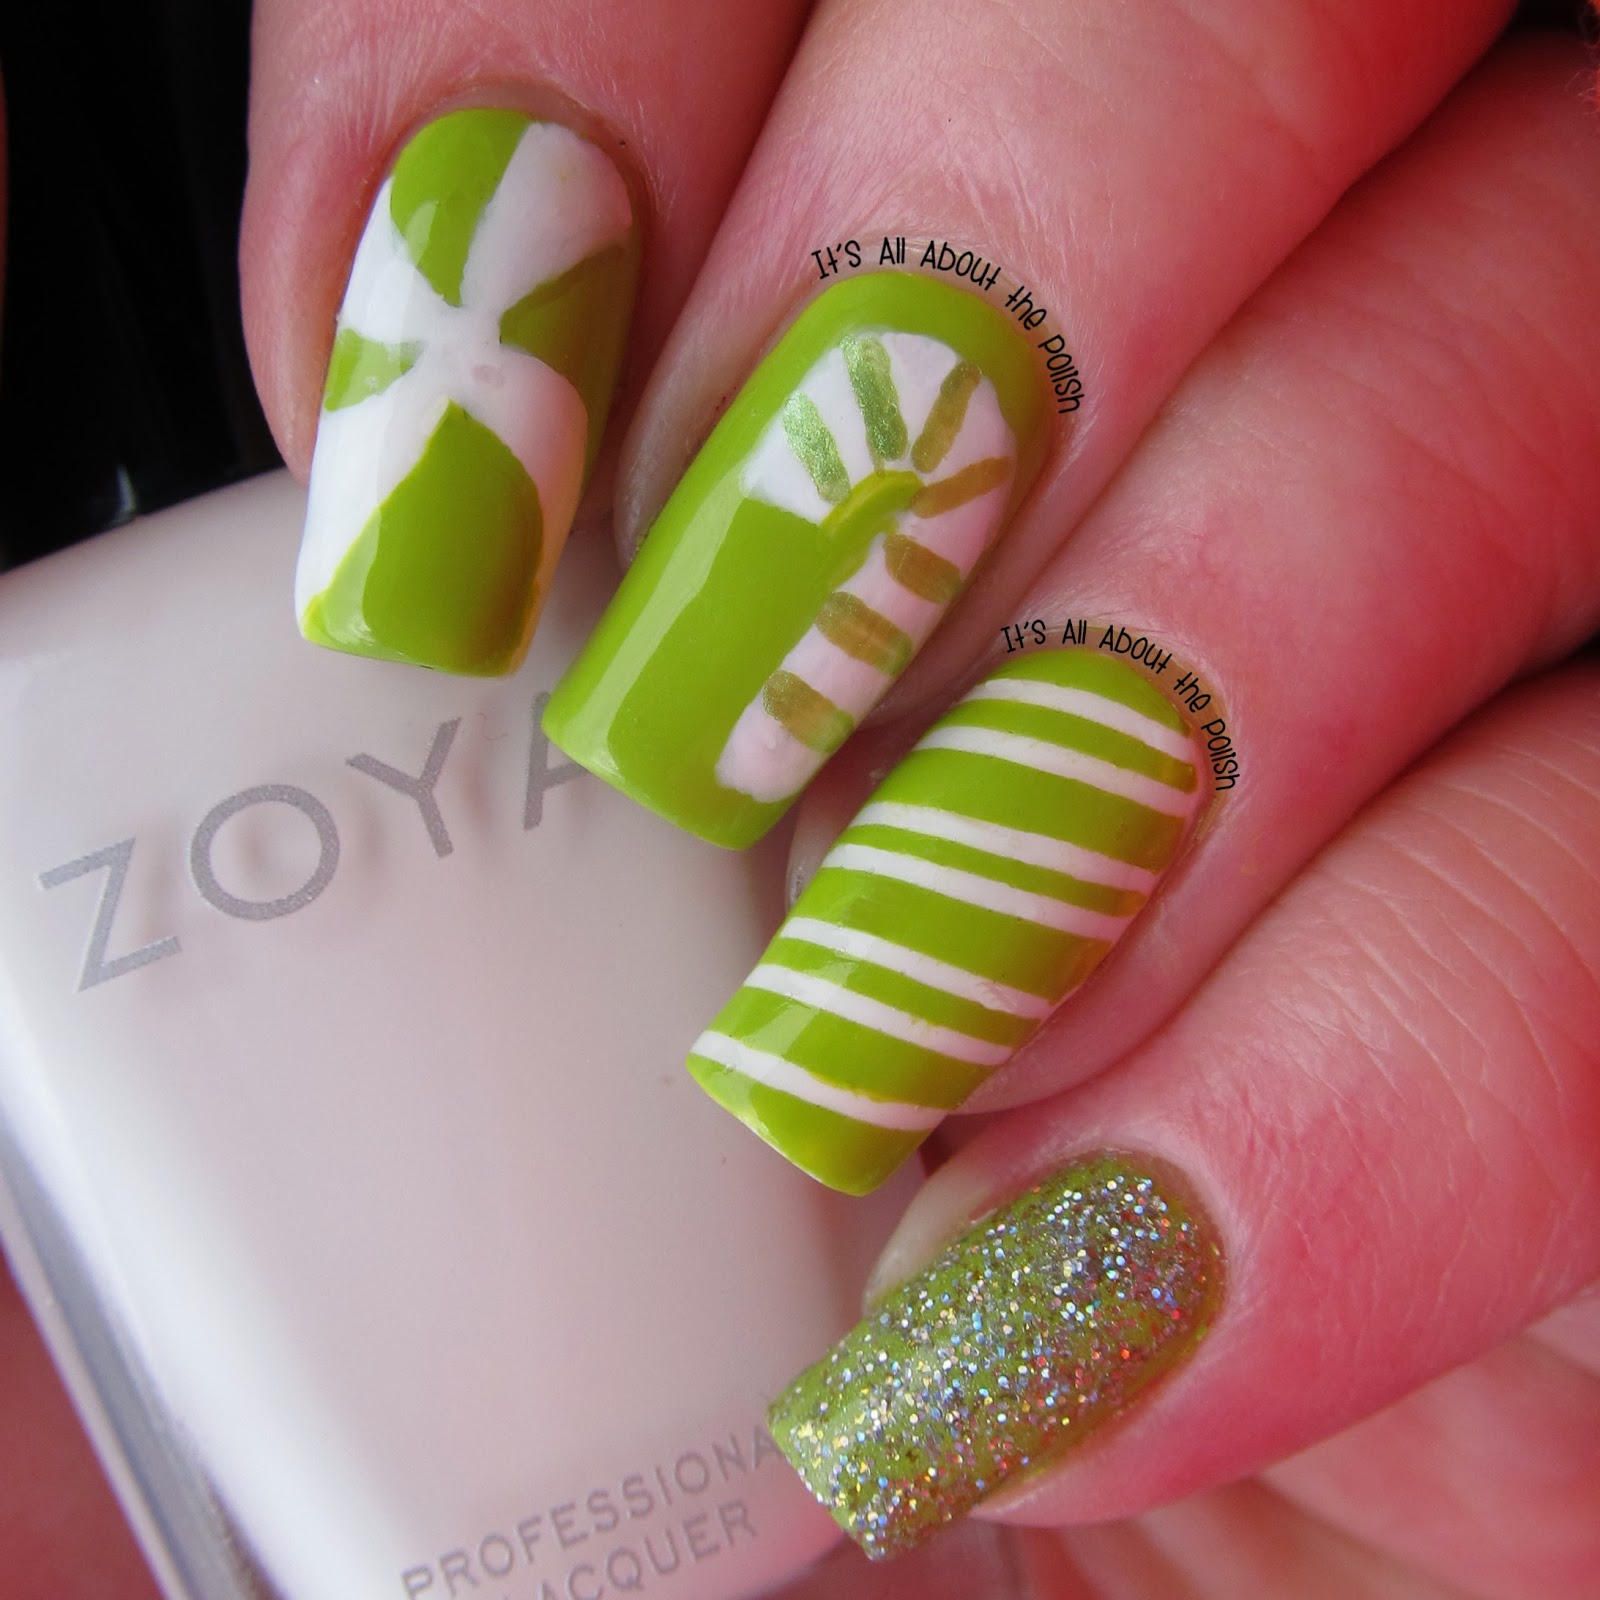 Since I ve already done the predictable red and white candy cane nail art I decided to do all bright green to represent peppermint Christmas candy